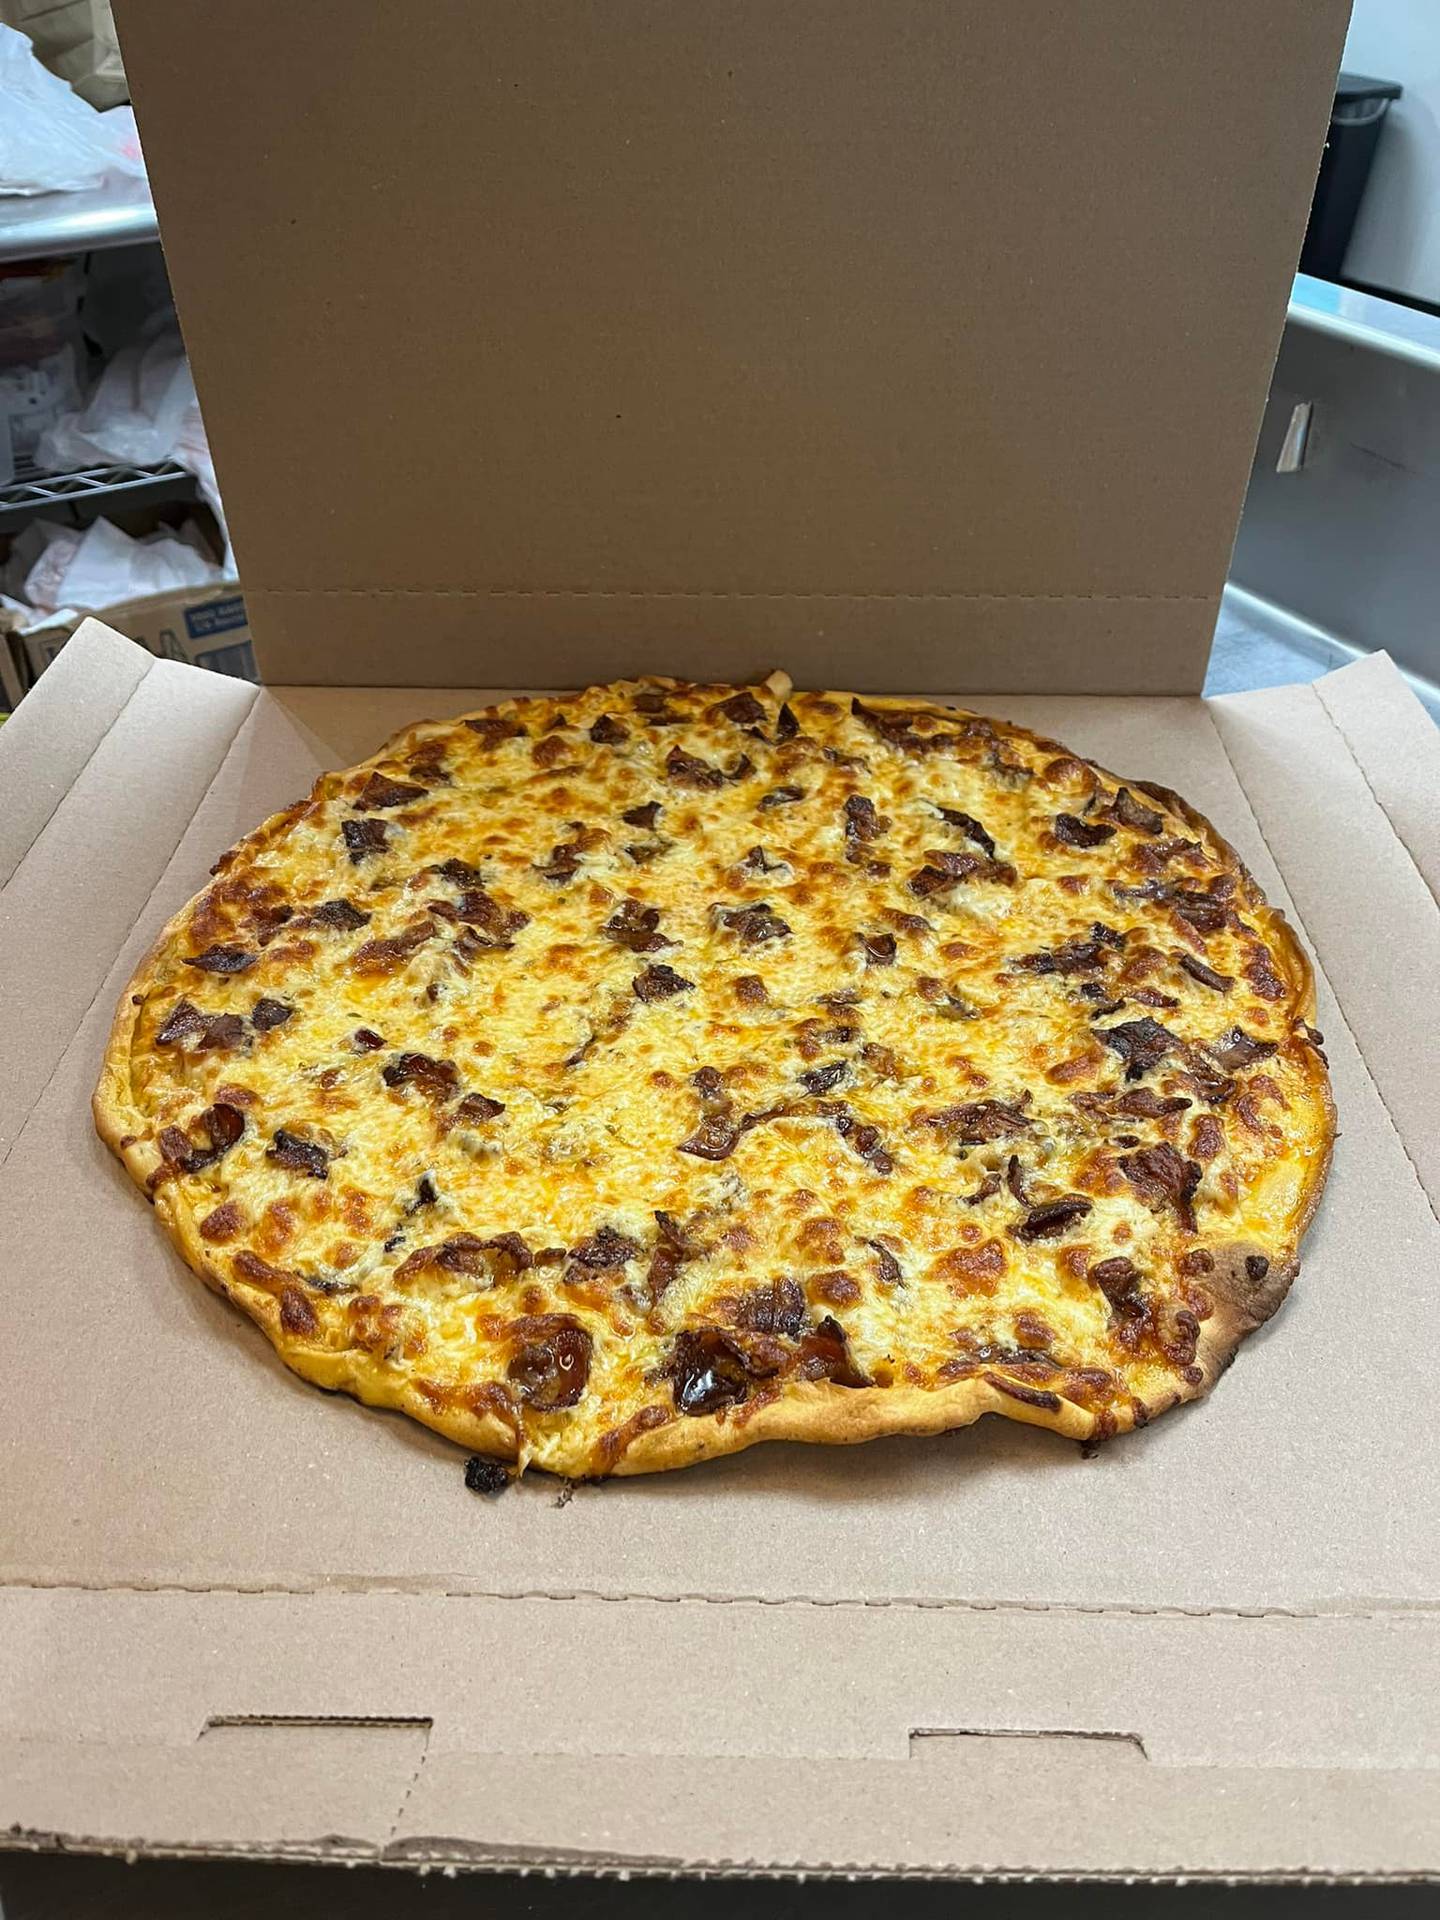 Sib's Corner Grill was named one of the finest pizza places in DeKalb by our readers in 2021. (Photo from Sib's Corner Grill Facebook page)